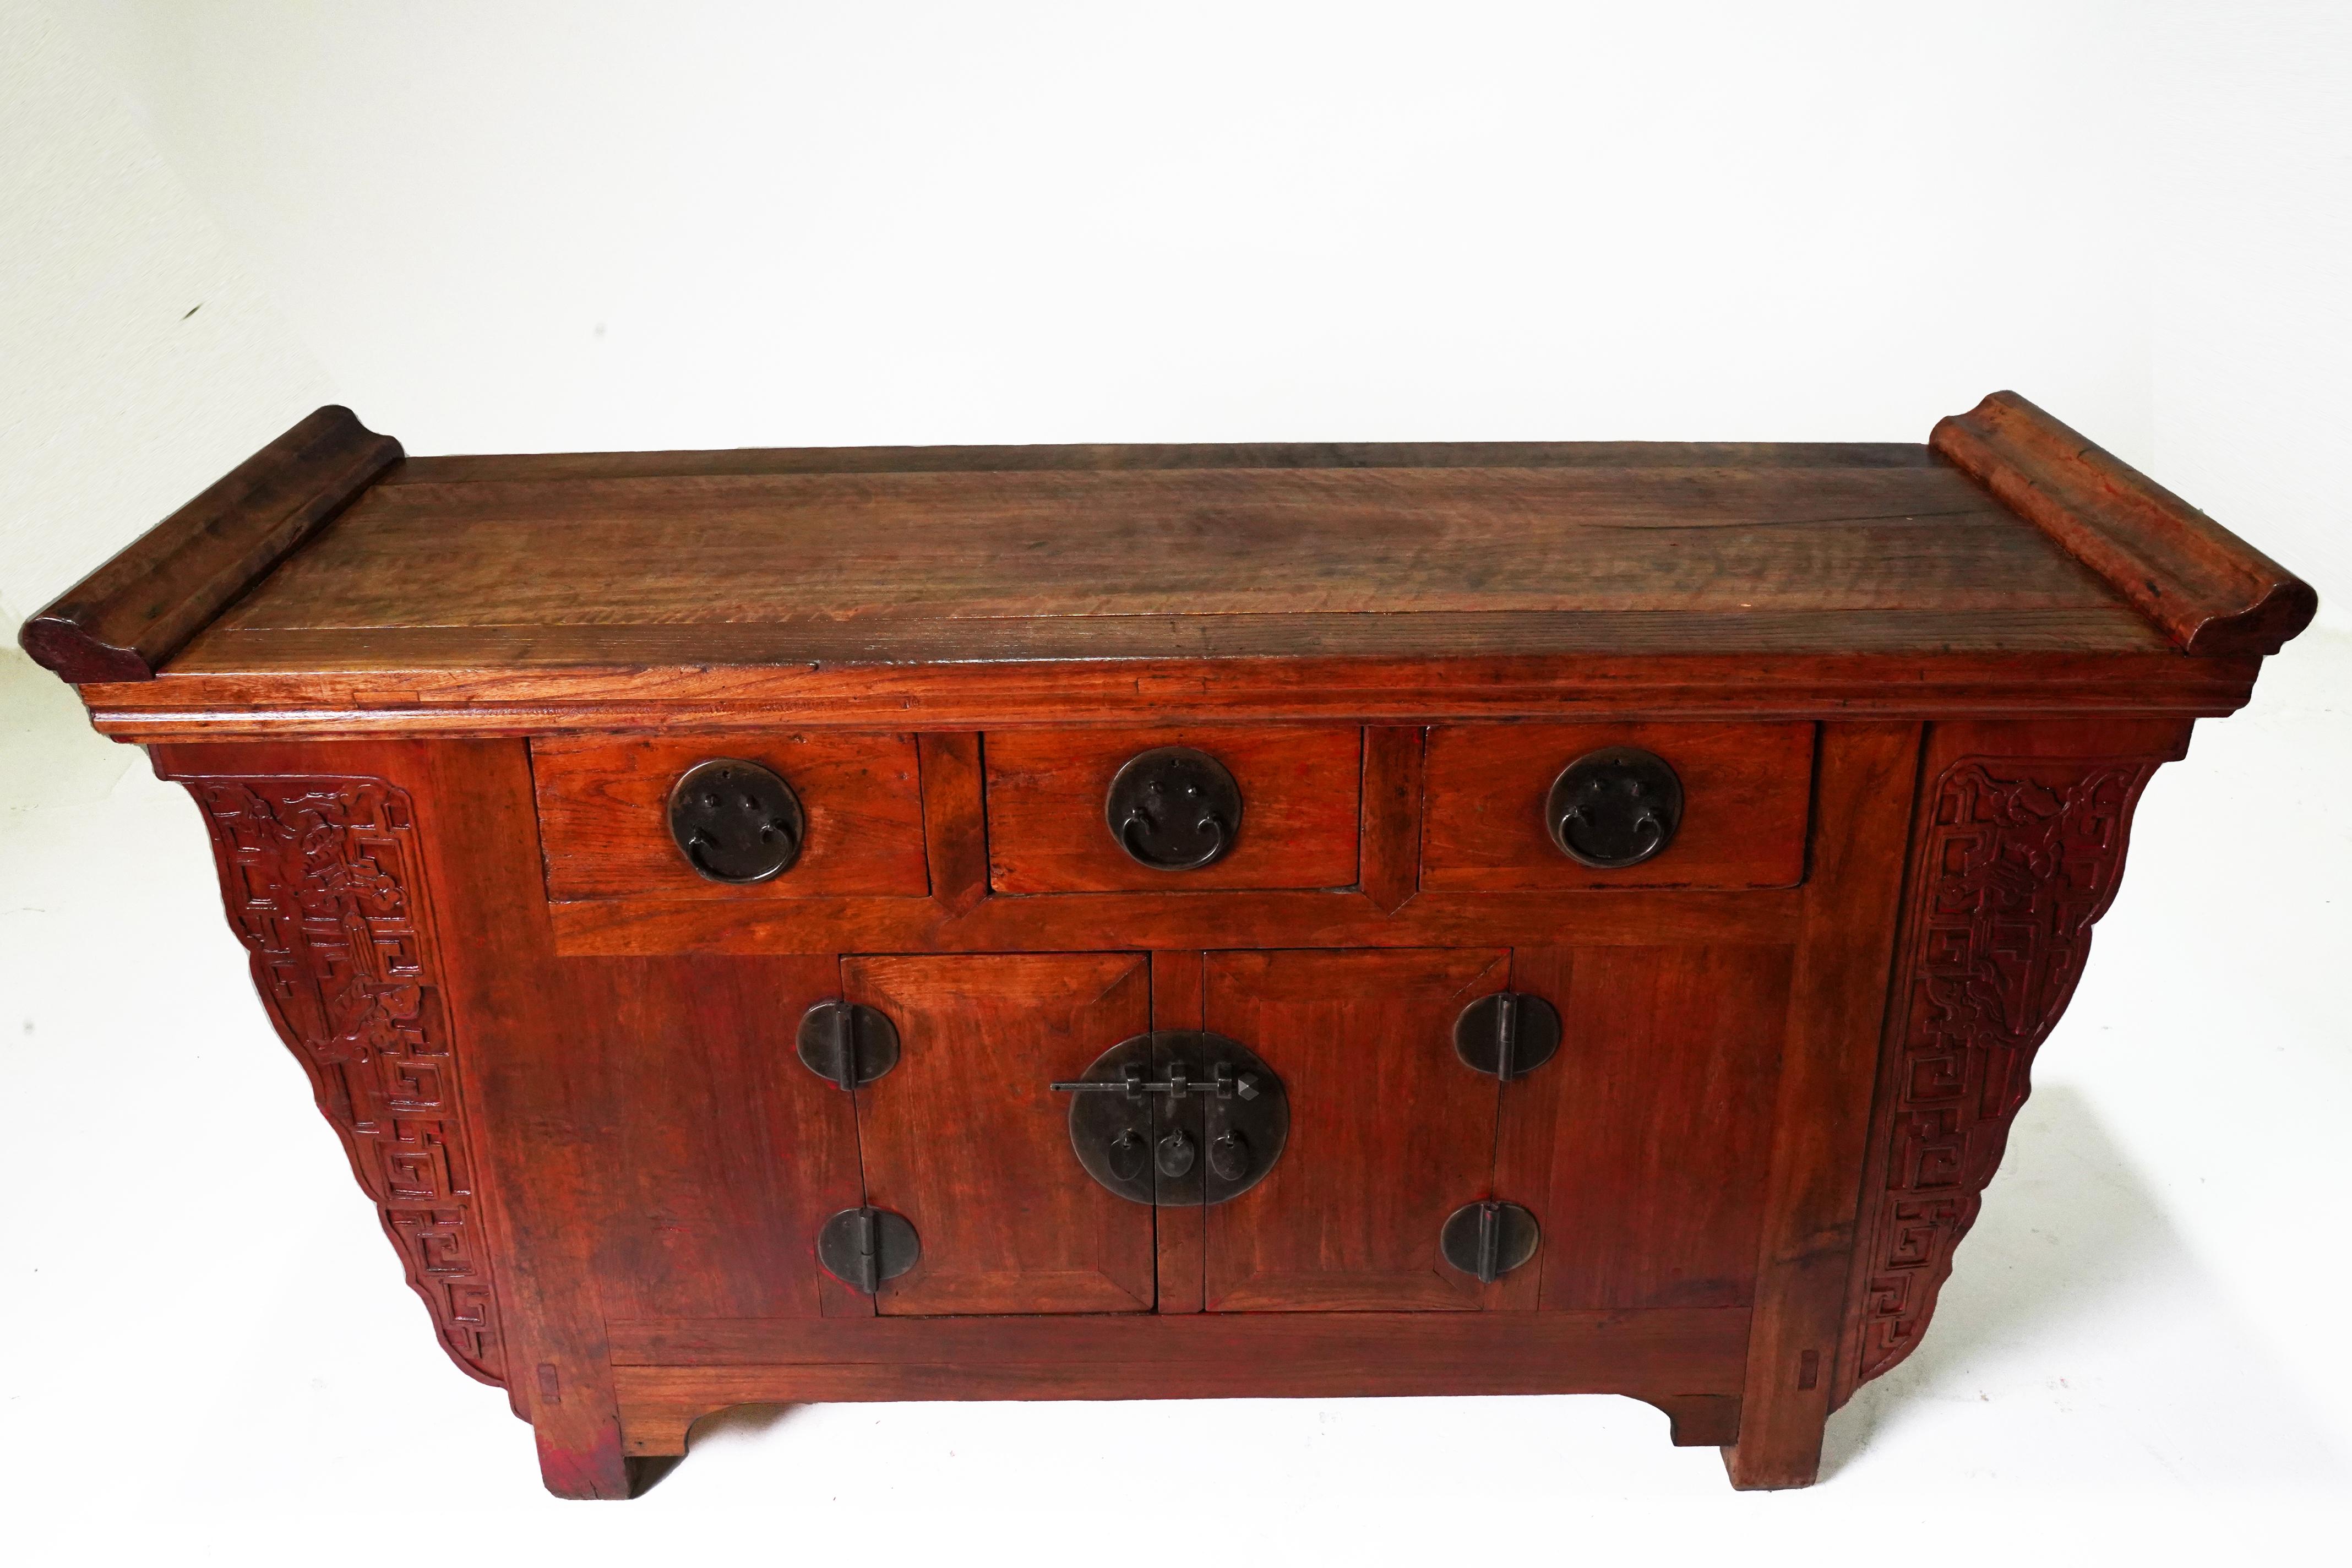 A C. 1900 Beijing Sideboard with Carved Spandrels and Original Lacquer In Good Condition For Sale In Chicago, IL